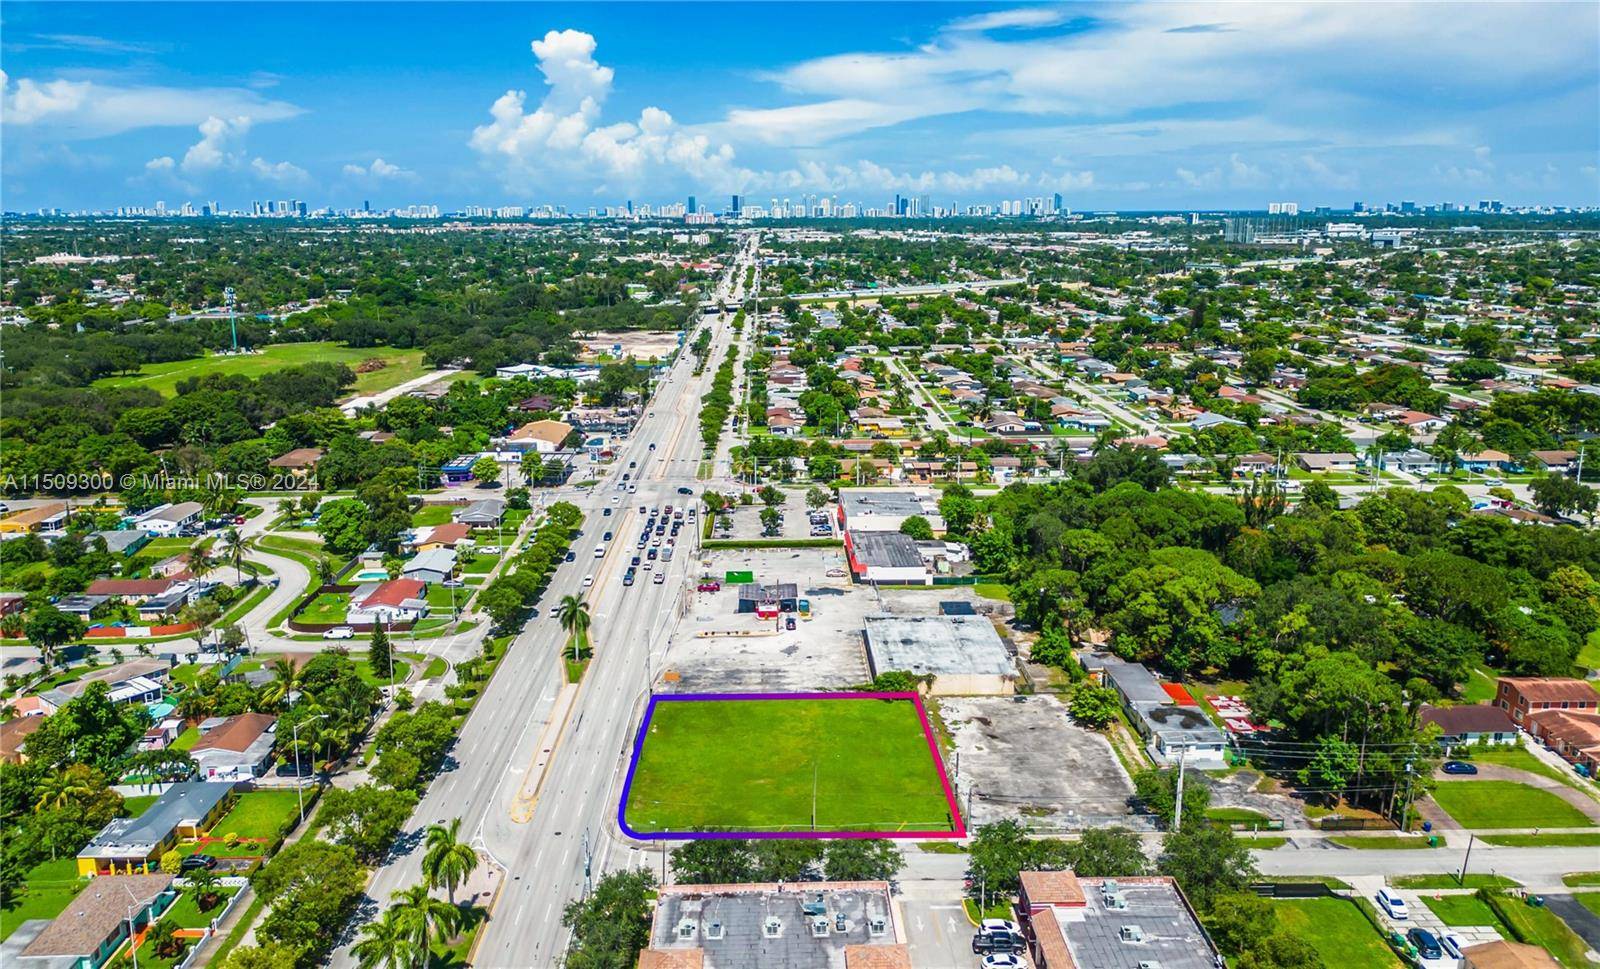 Proud to present a 0. 52 acre corner land parcel on the main NW 183rd Street corridor of Miami Gardens.